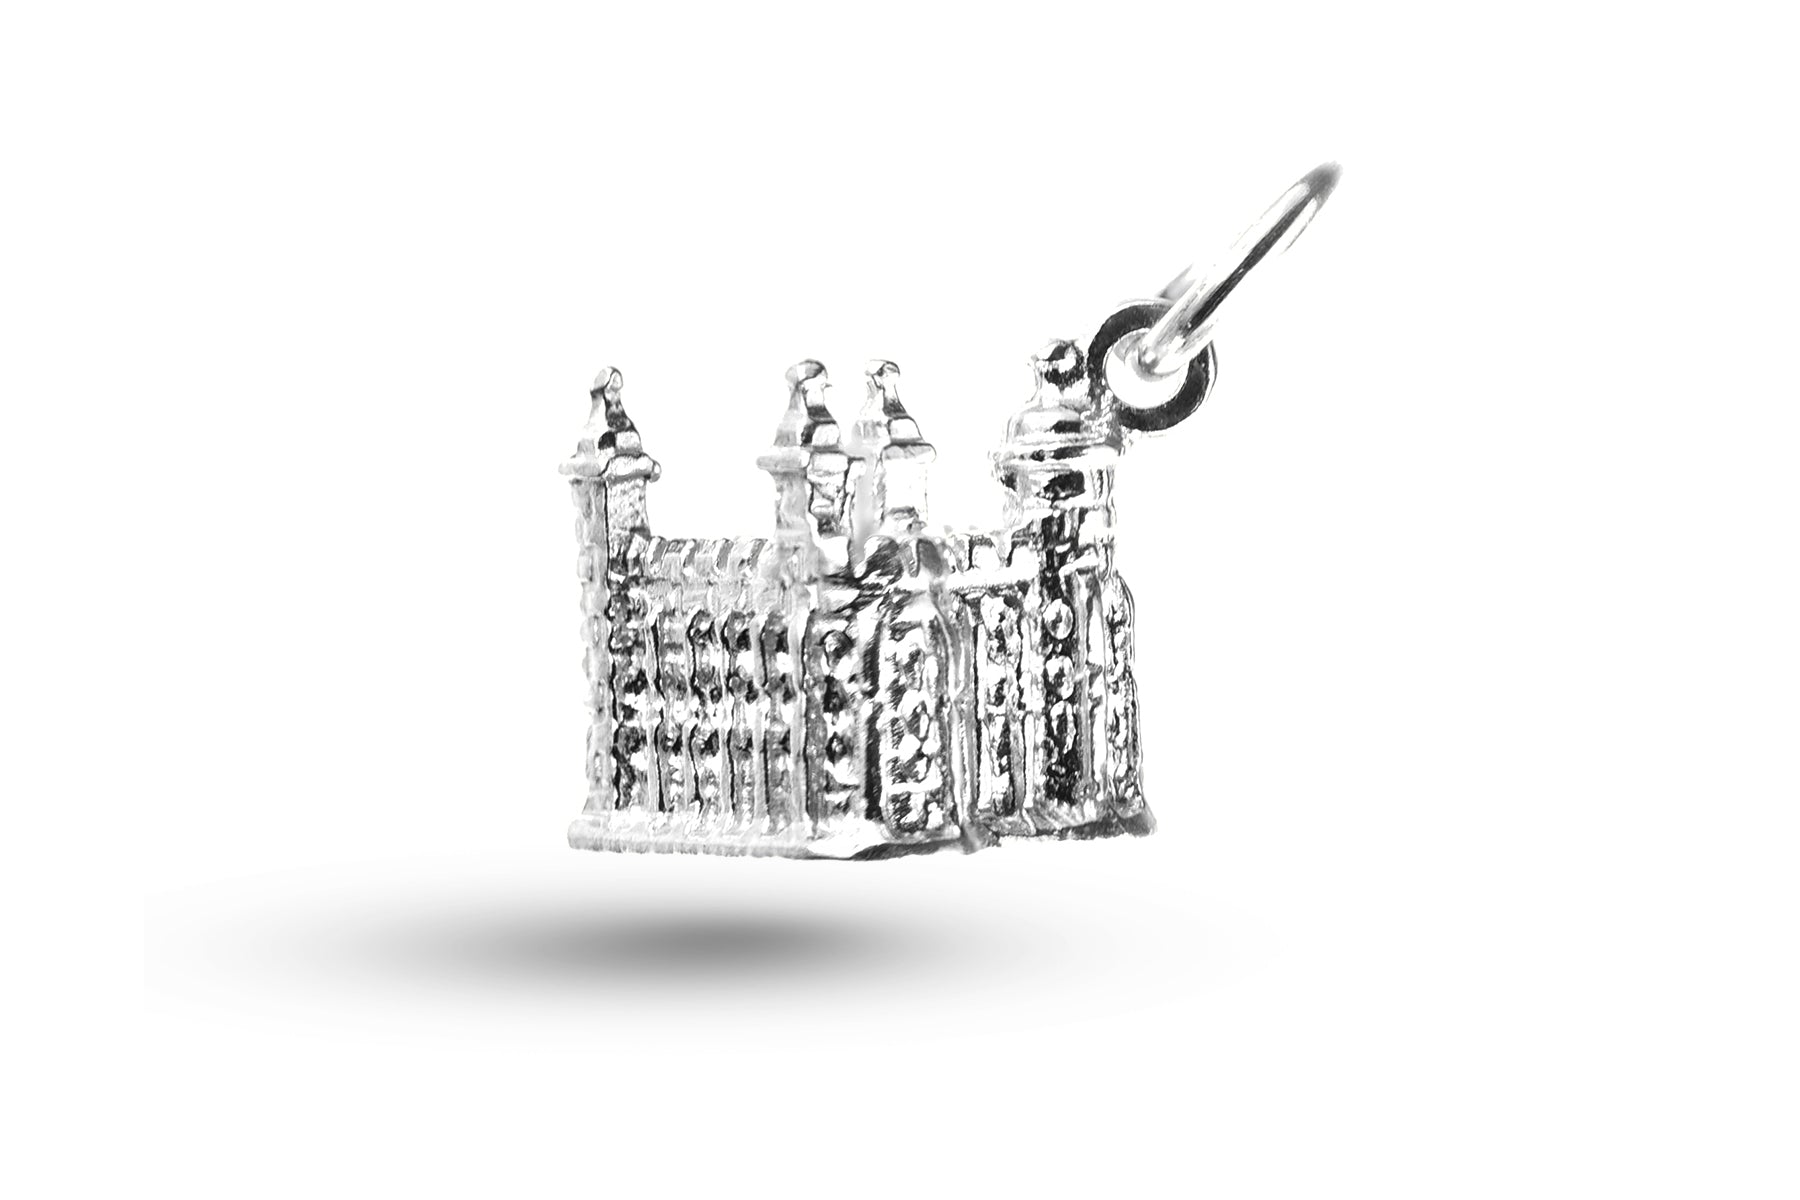 White gold Tower of London charm.